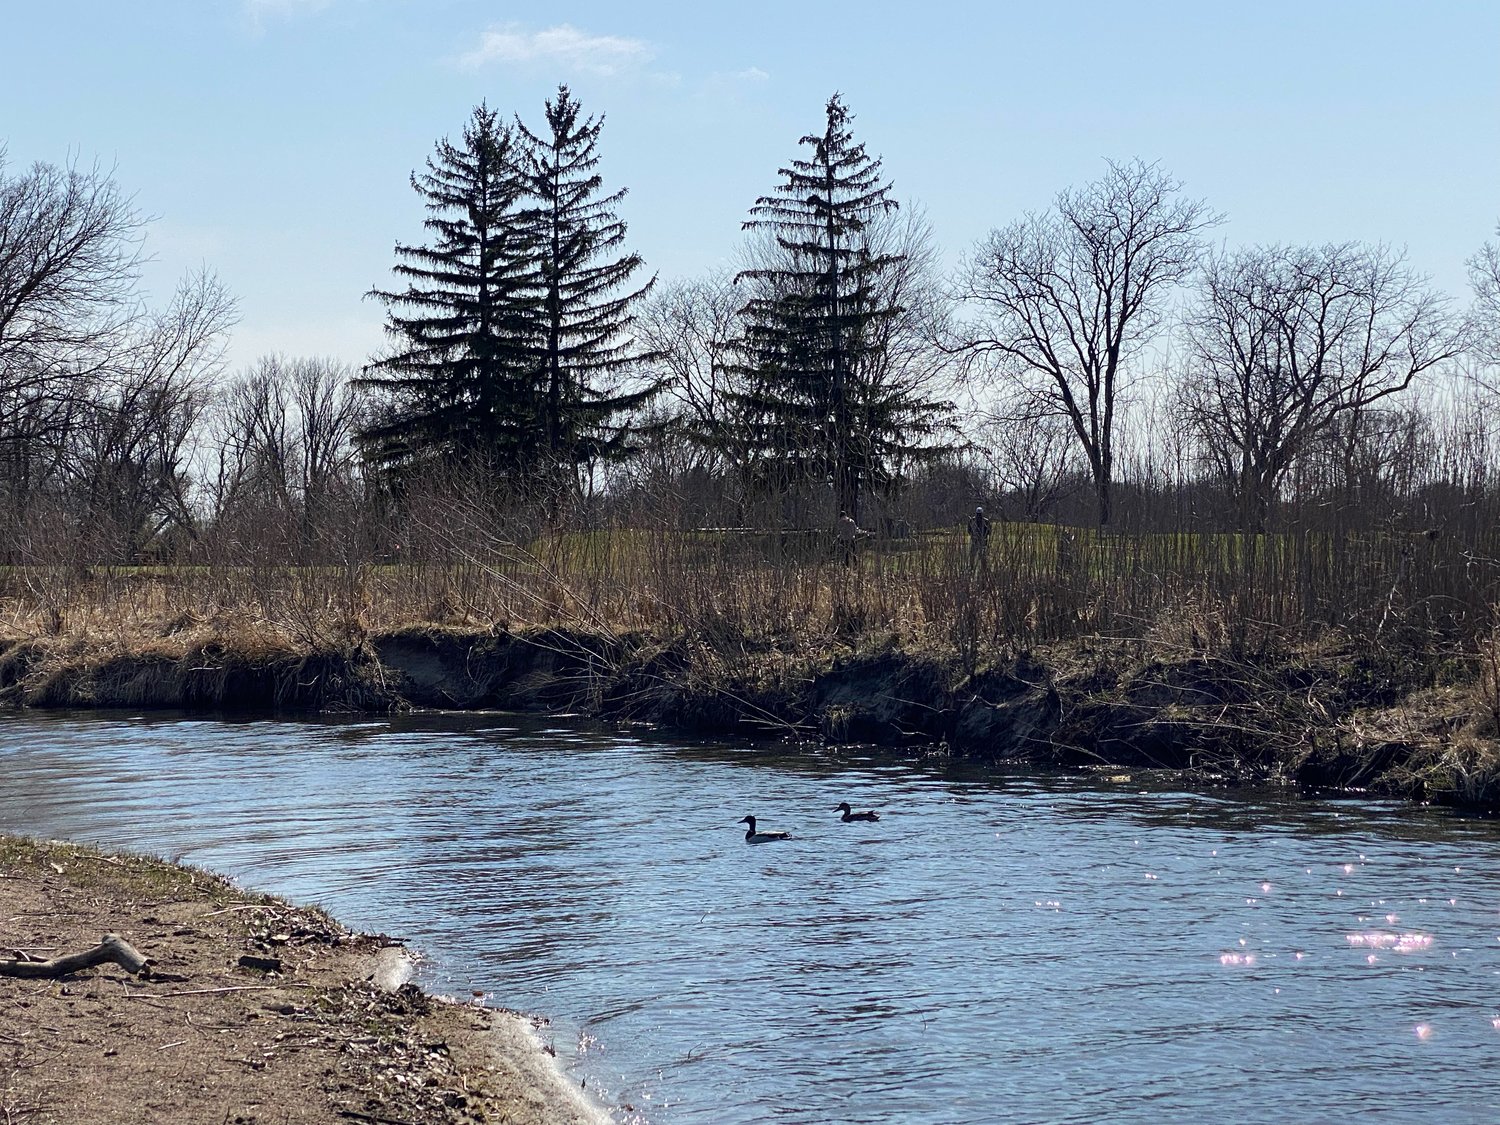 The delta habitat is the heart of the Lake Hiawatha’s biodiversity, and has been the focus of countless hours of community restoration work. Friends of Lake Hiawatha have worked for years with Dakota friends to restore foods and medicines obliterated from this land in 1929.